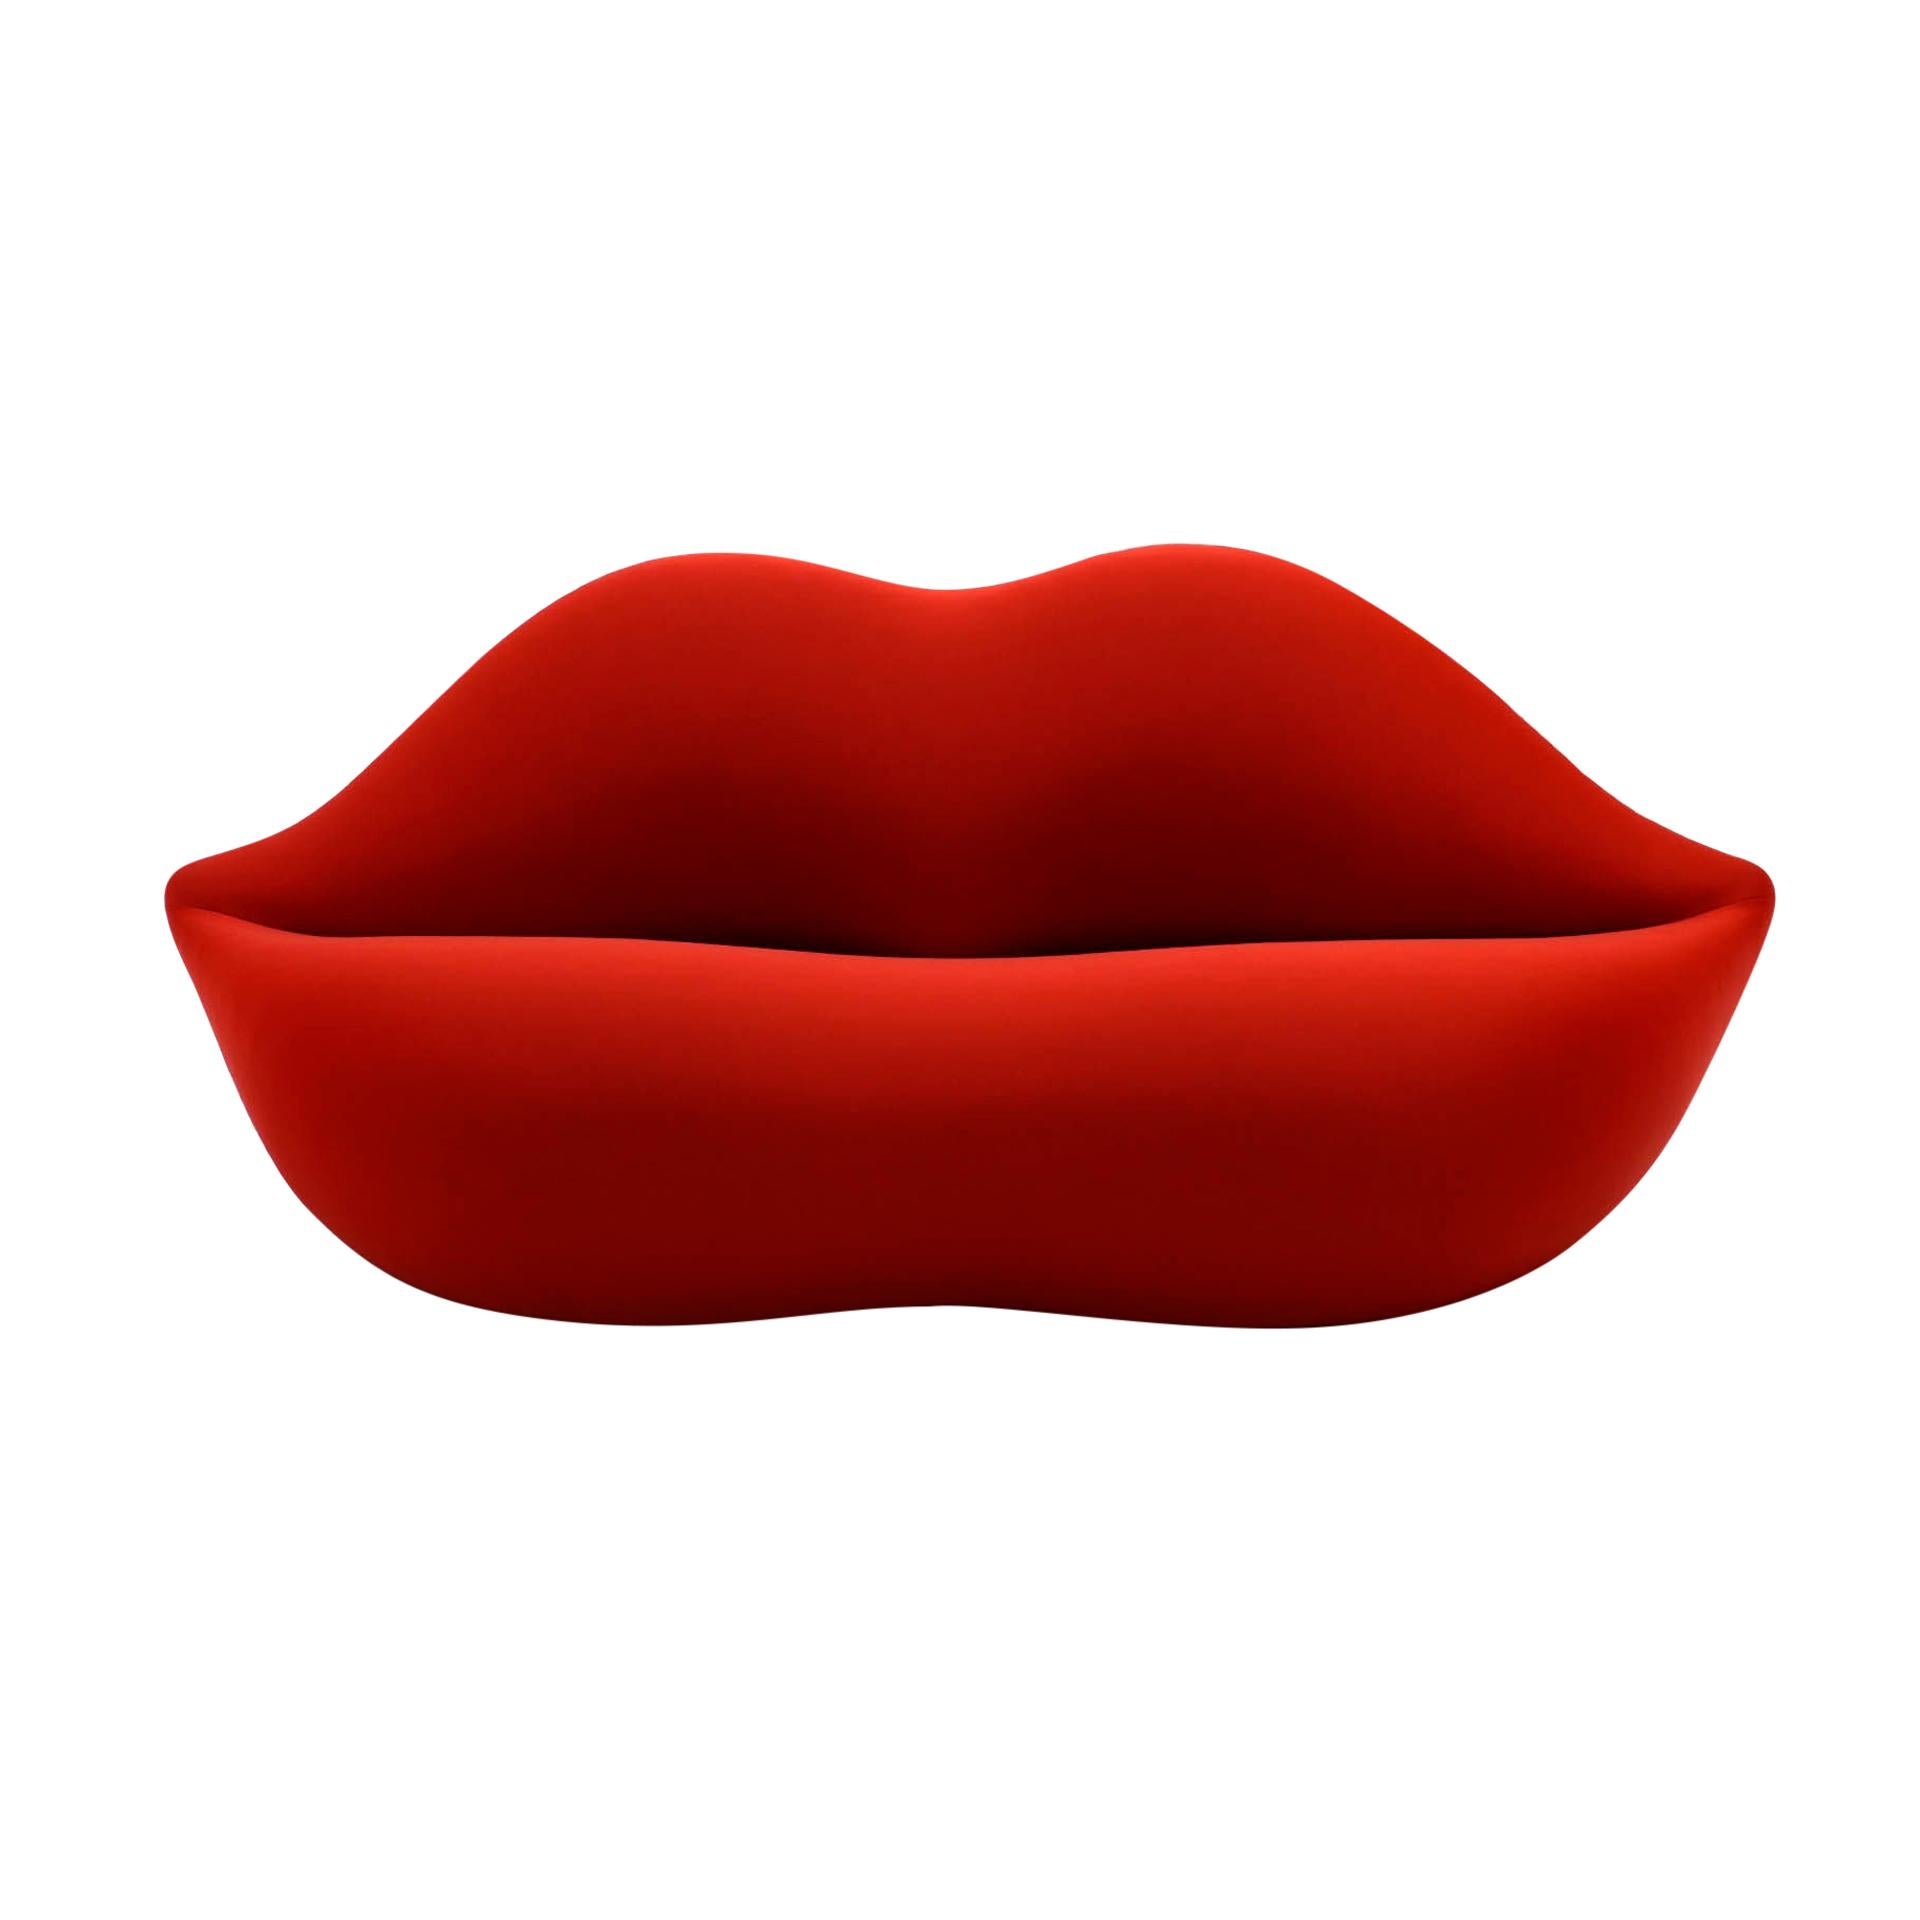 Marilyn Bocca Lip Sofa by Gufram, 1986, Signed, #79 From Edition of 1000